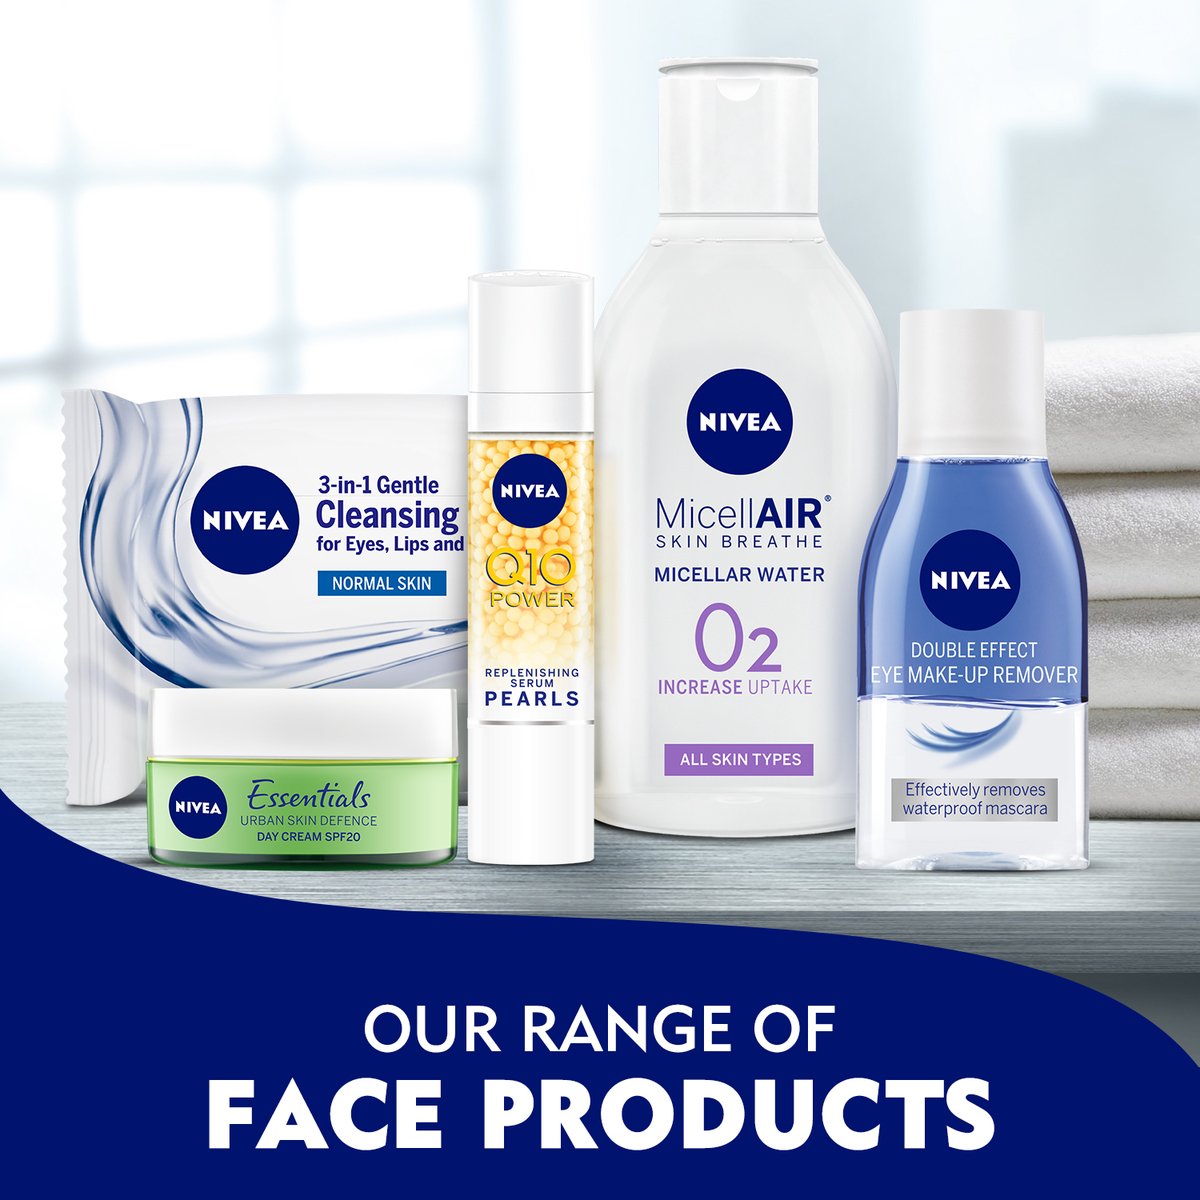 Nivea Face Wipes Pure Cleansing All Skin Types 25 pcs